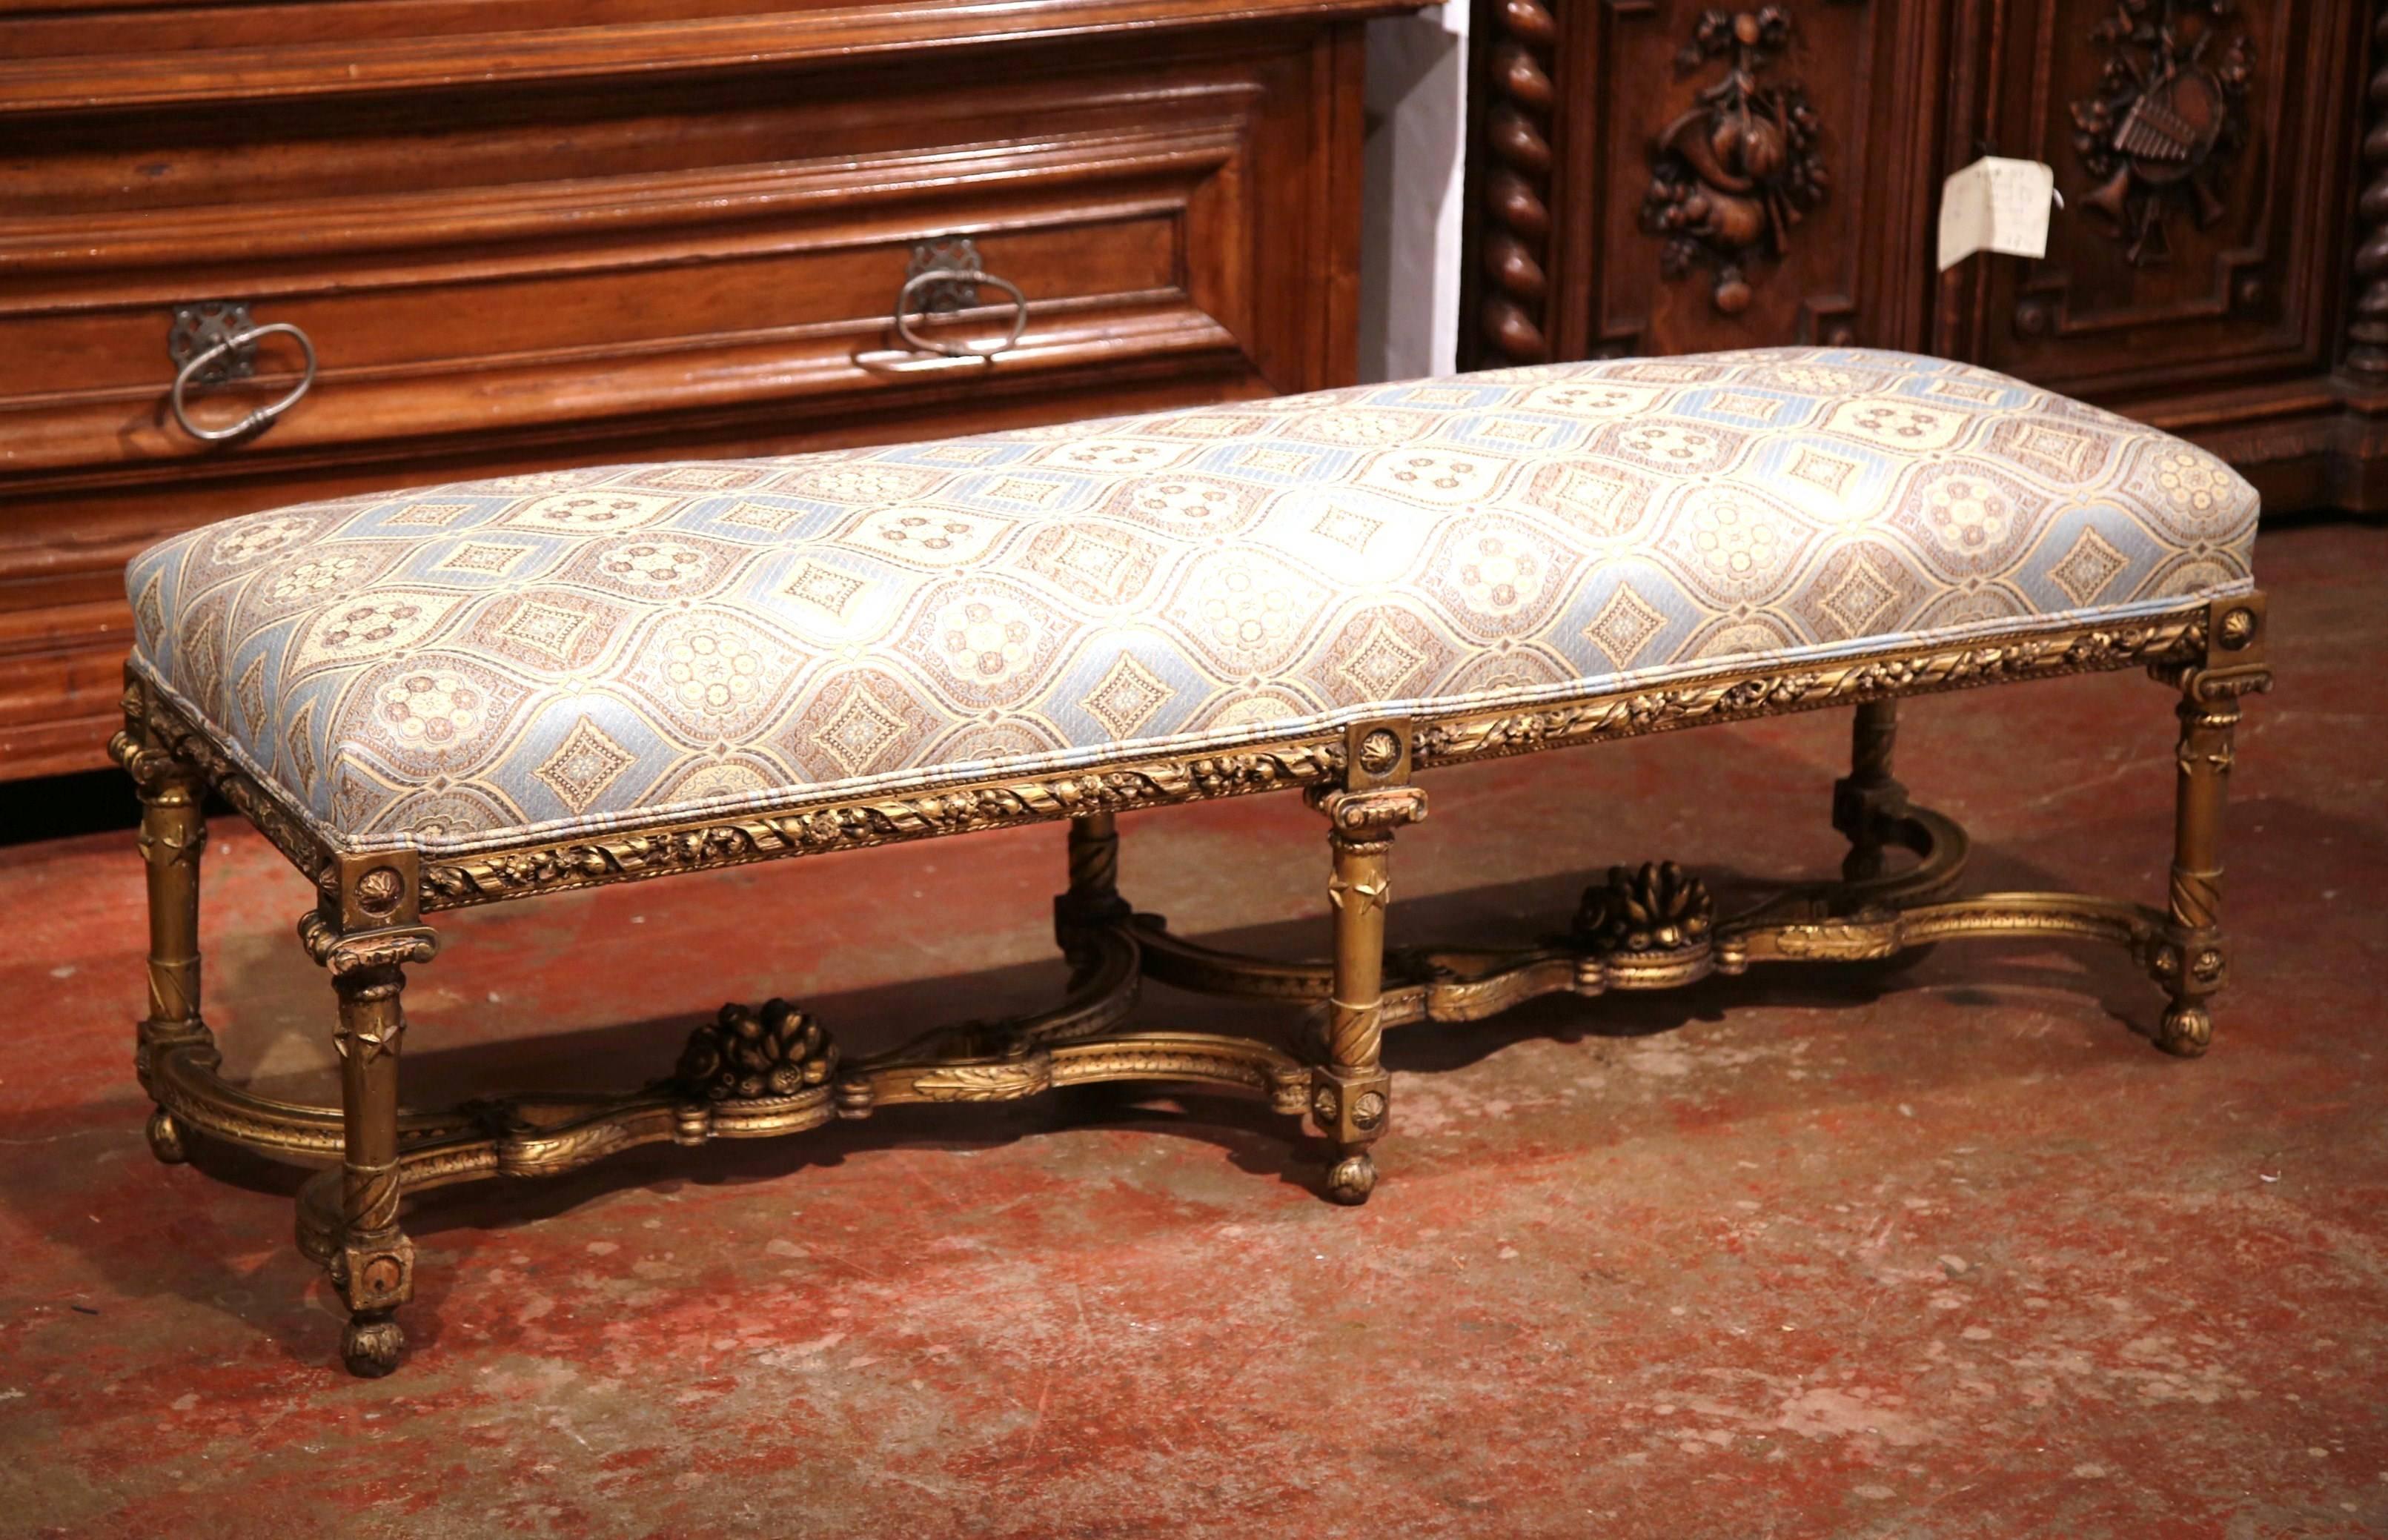 Empire 19th Century French Six-Leg Giltwood Bench with Carved Stretcher and New Fabric